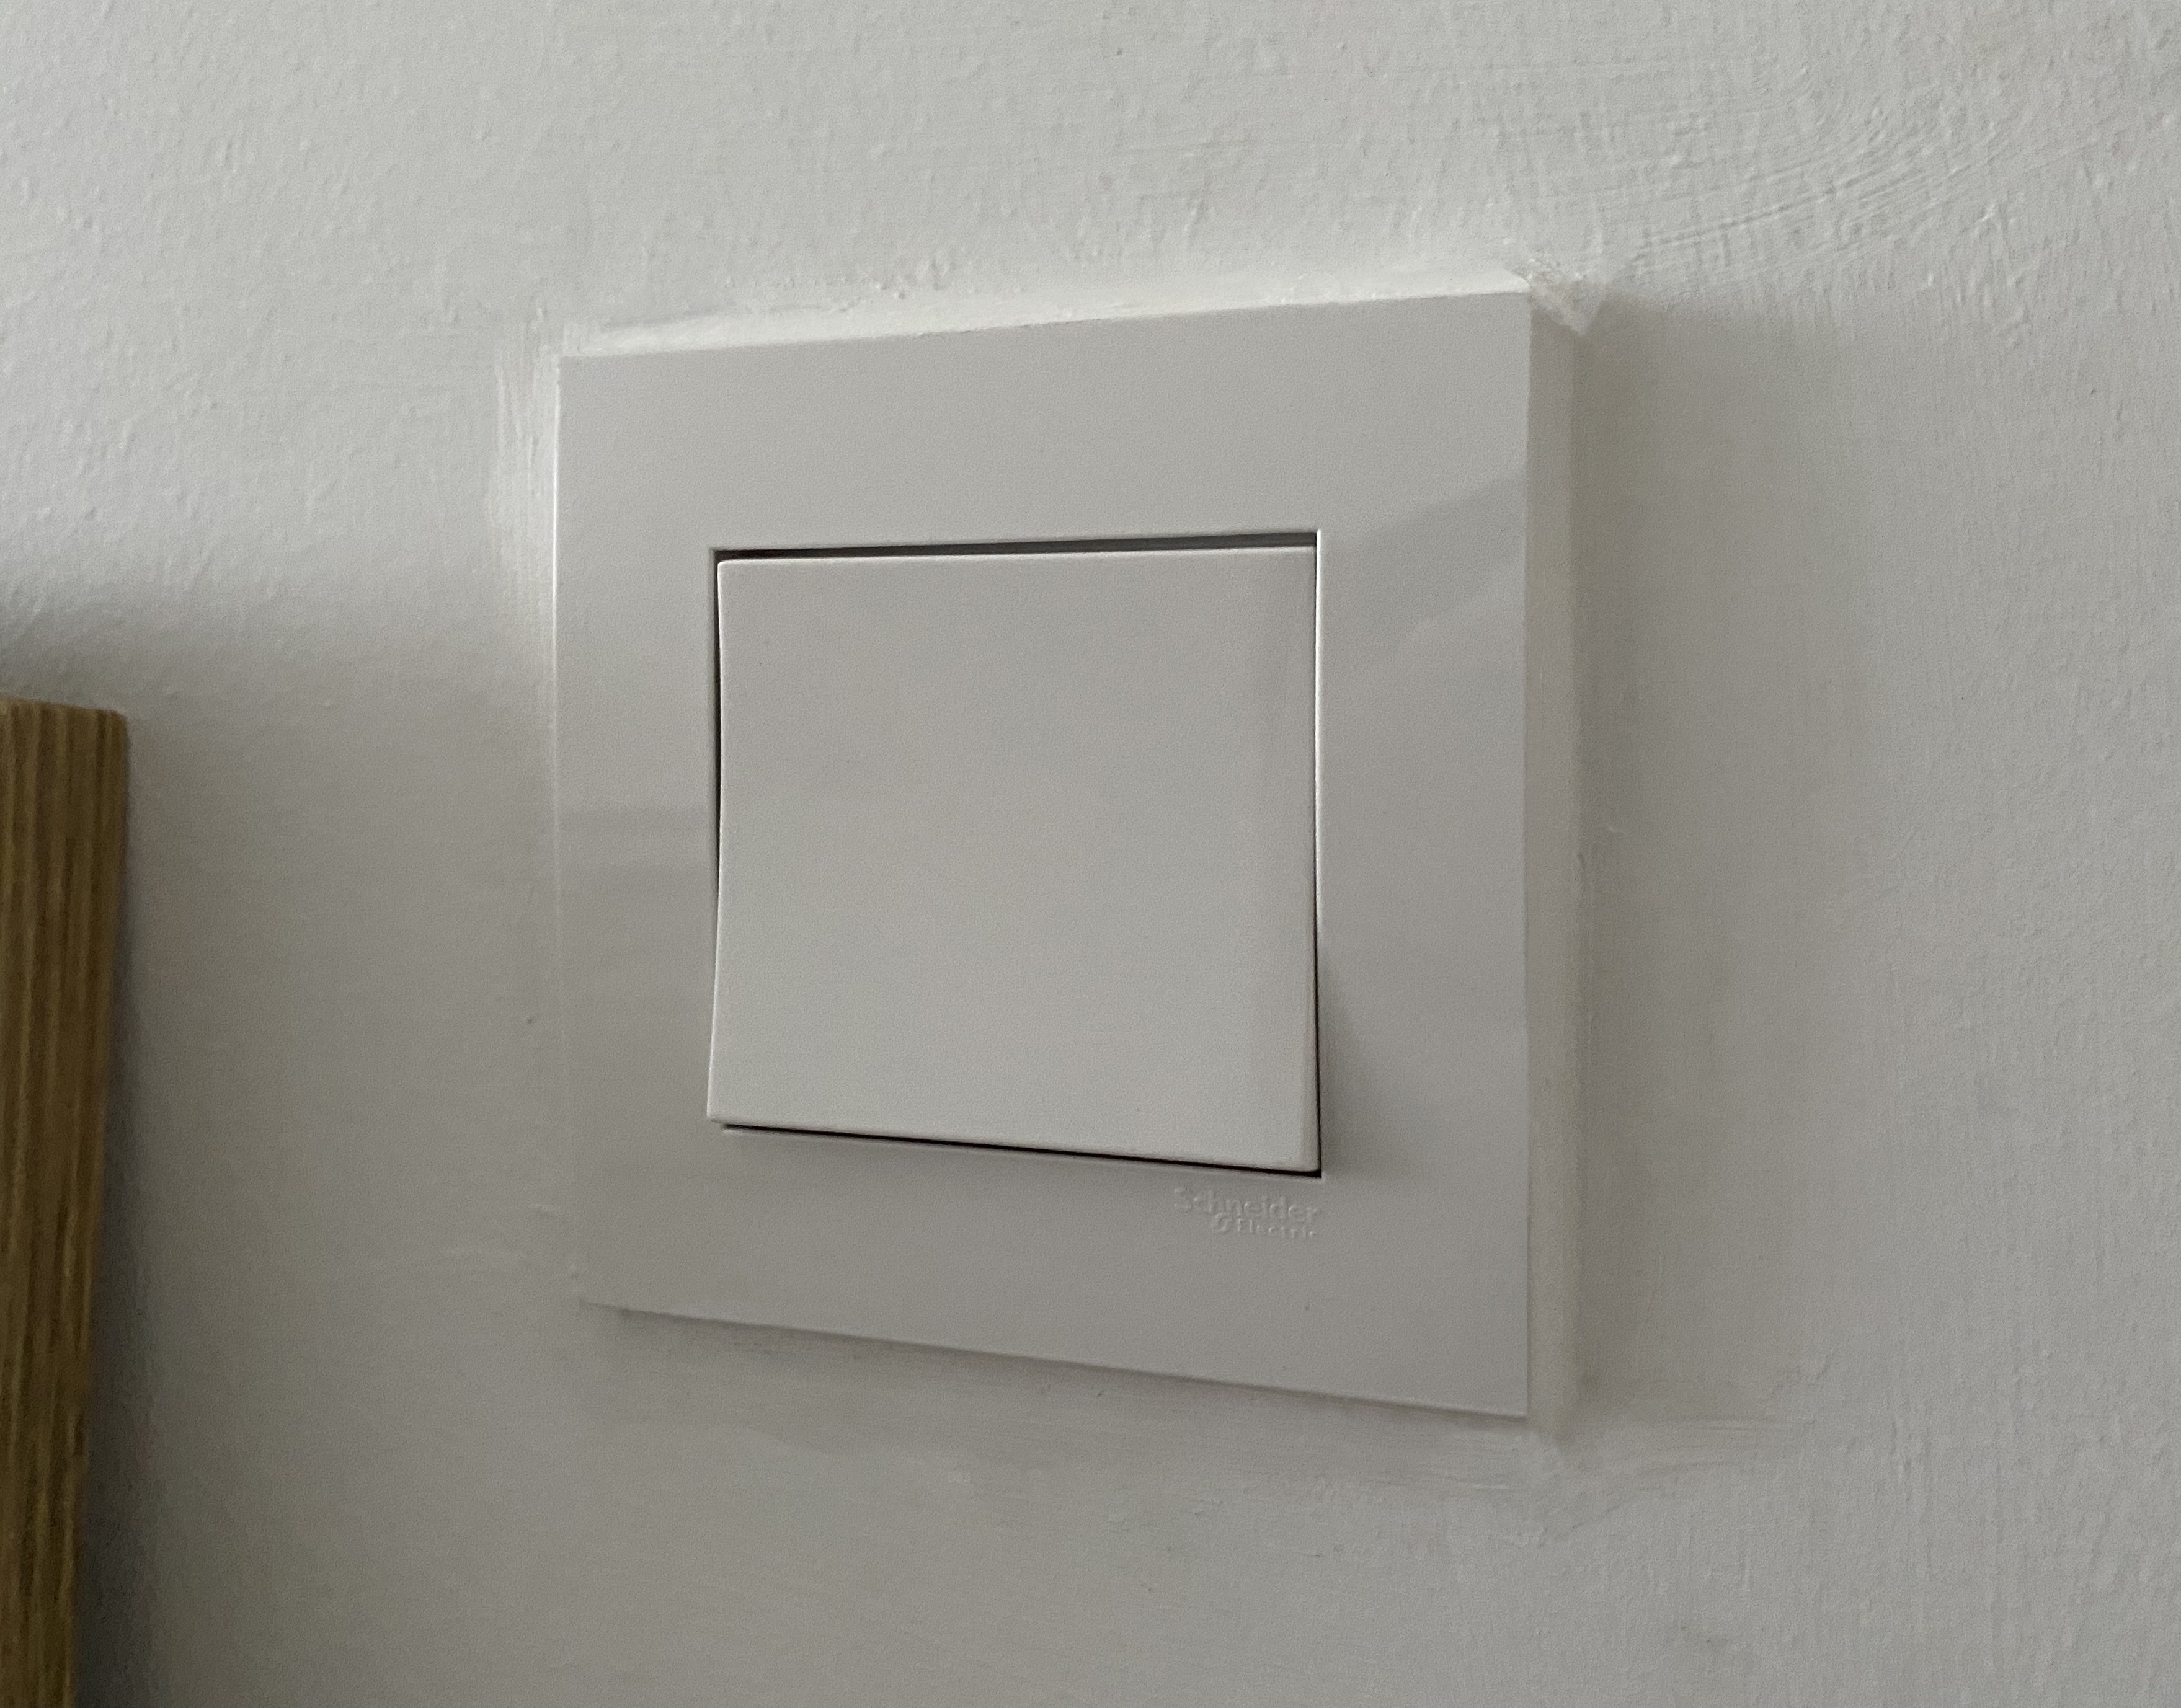 A one-gang two-way switch we installed